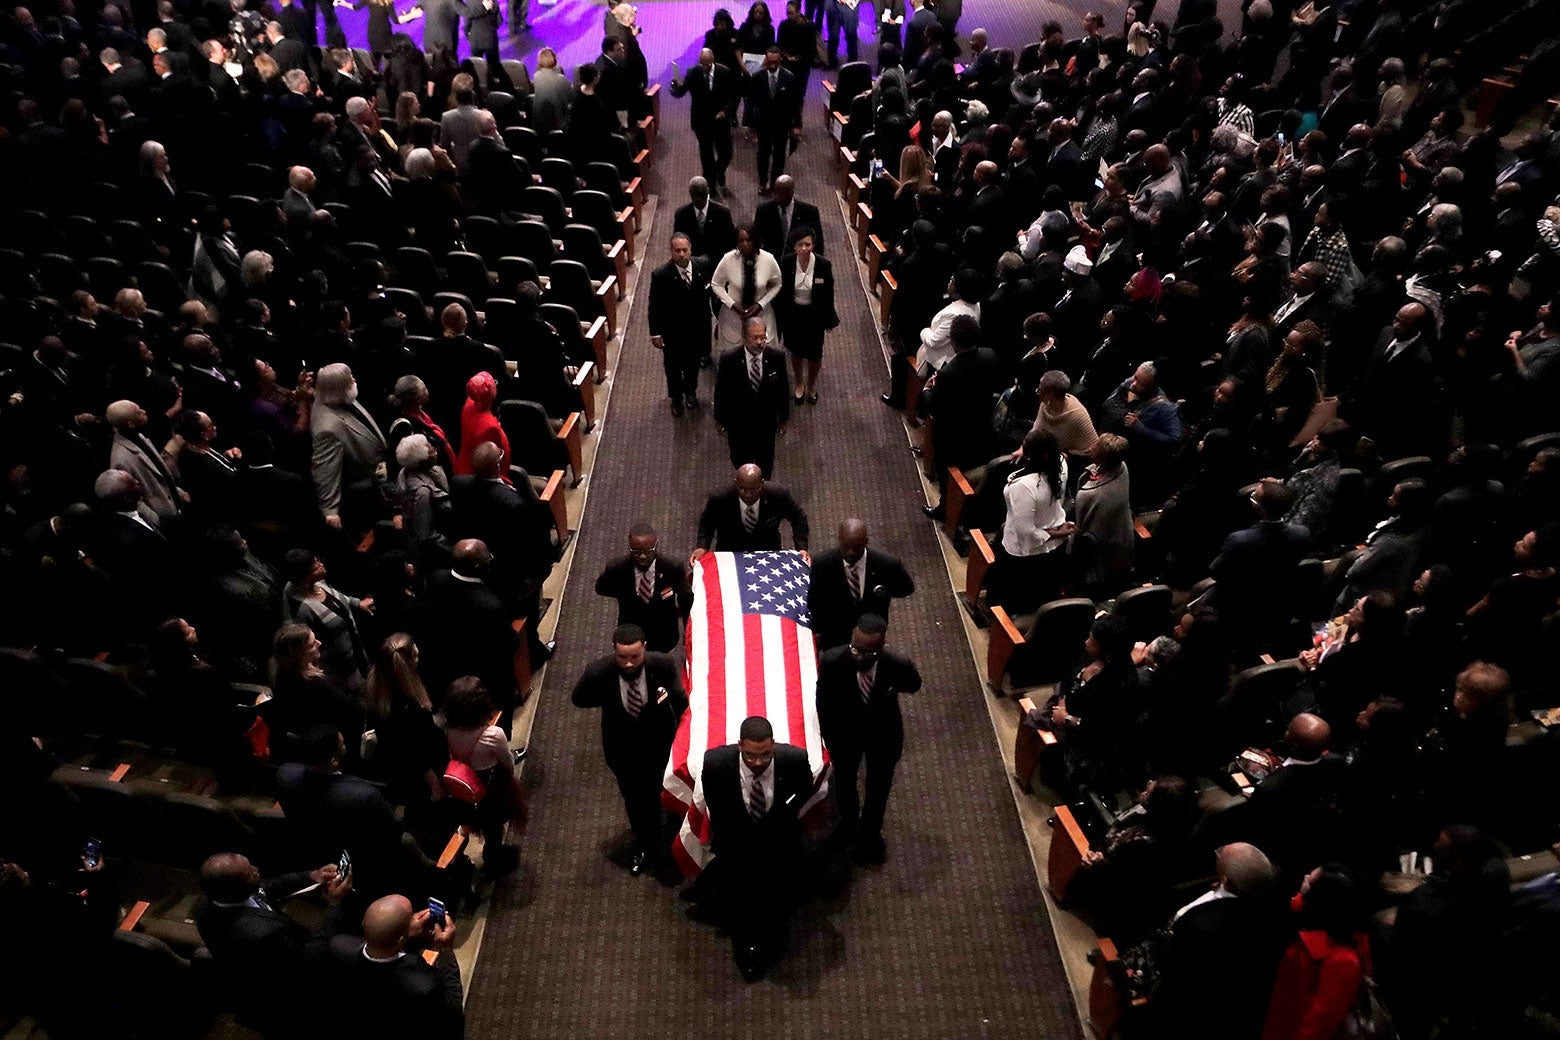 Pallbearers carry a casket with an American flag on it.